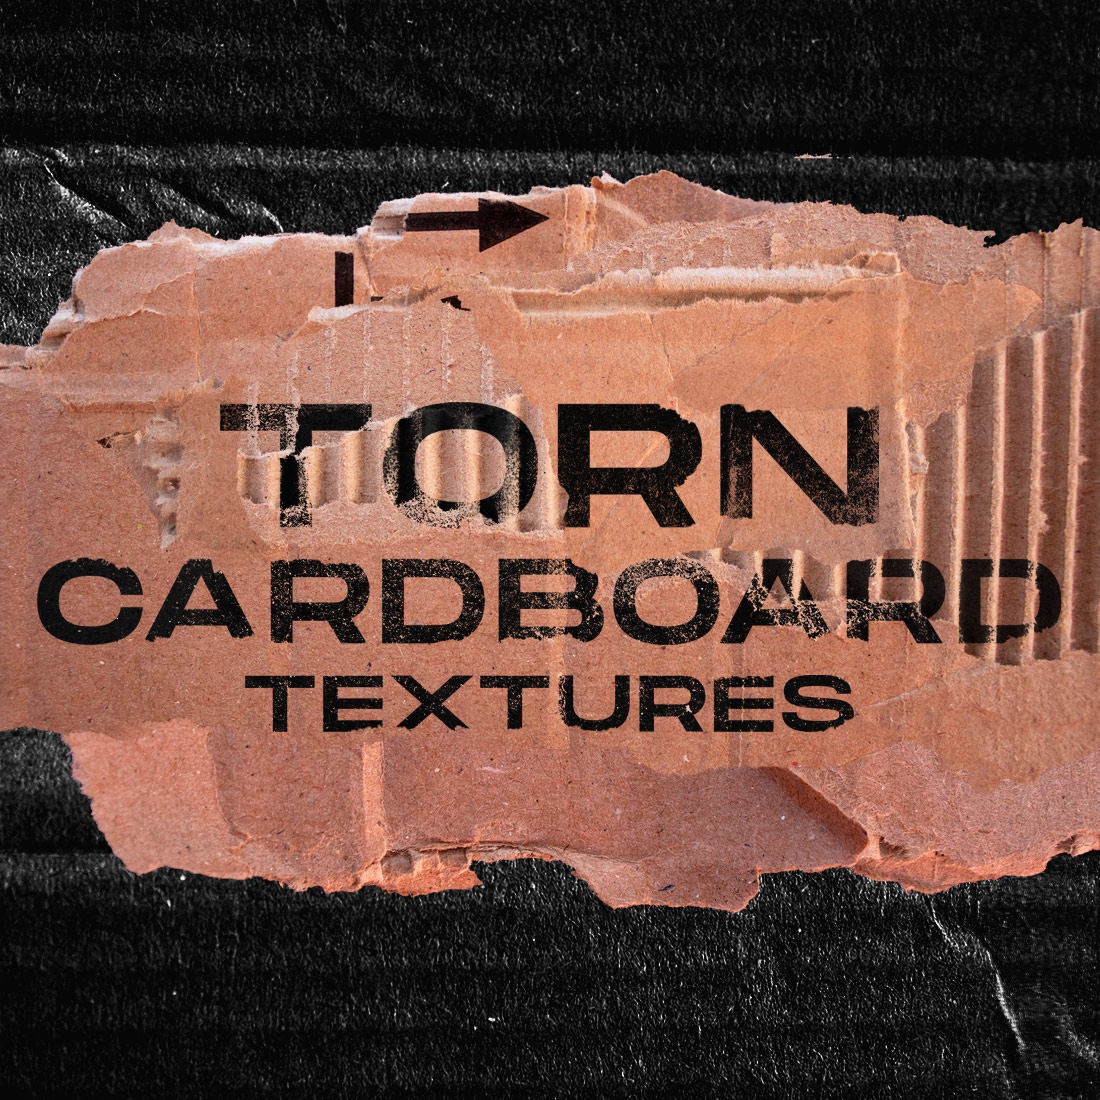 Torn Cardboard Textures cover image.